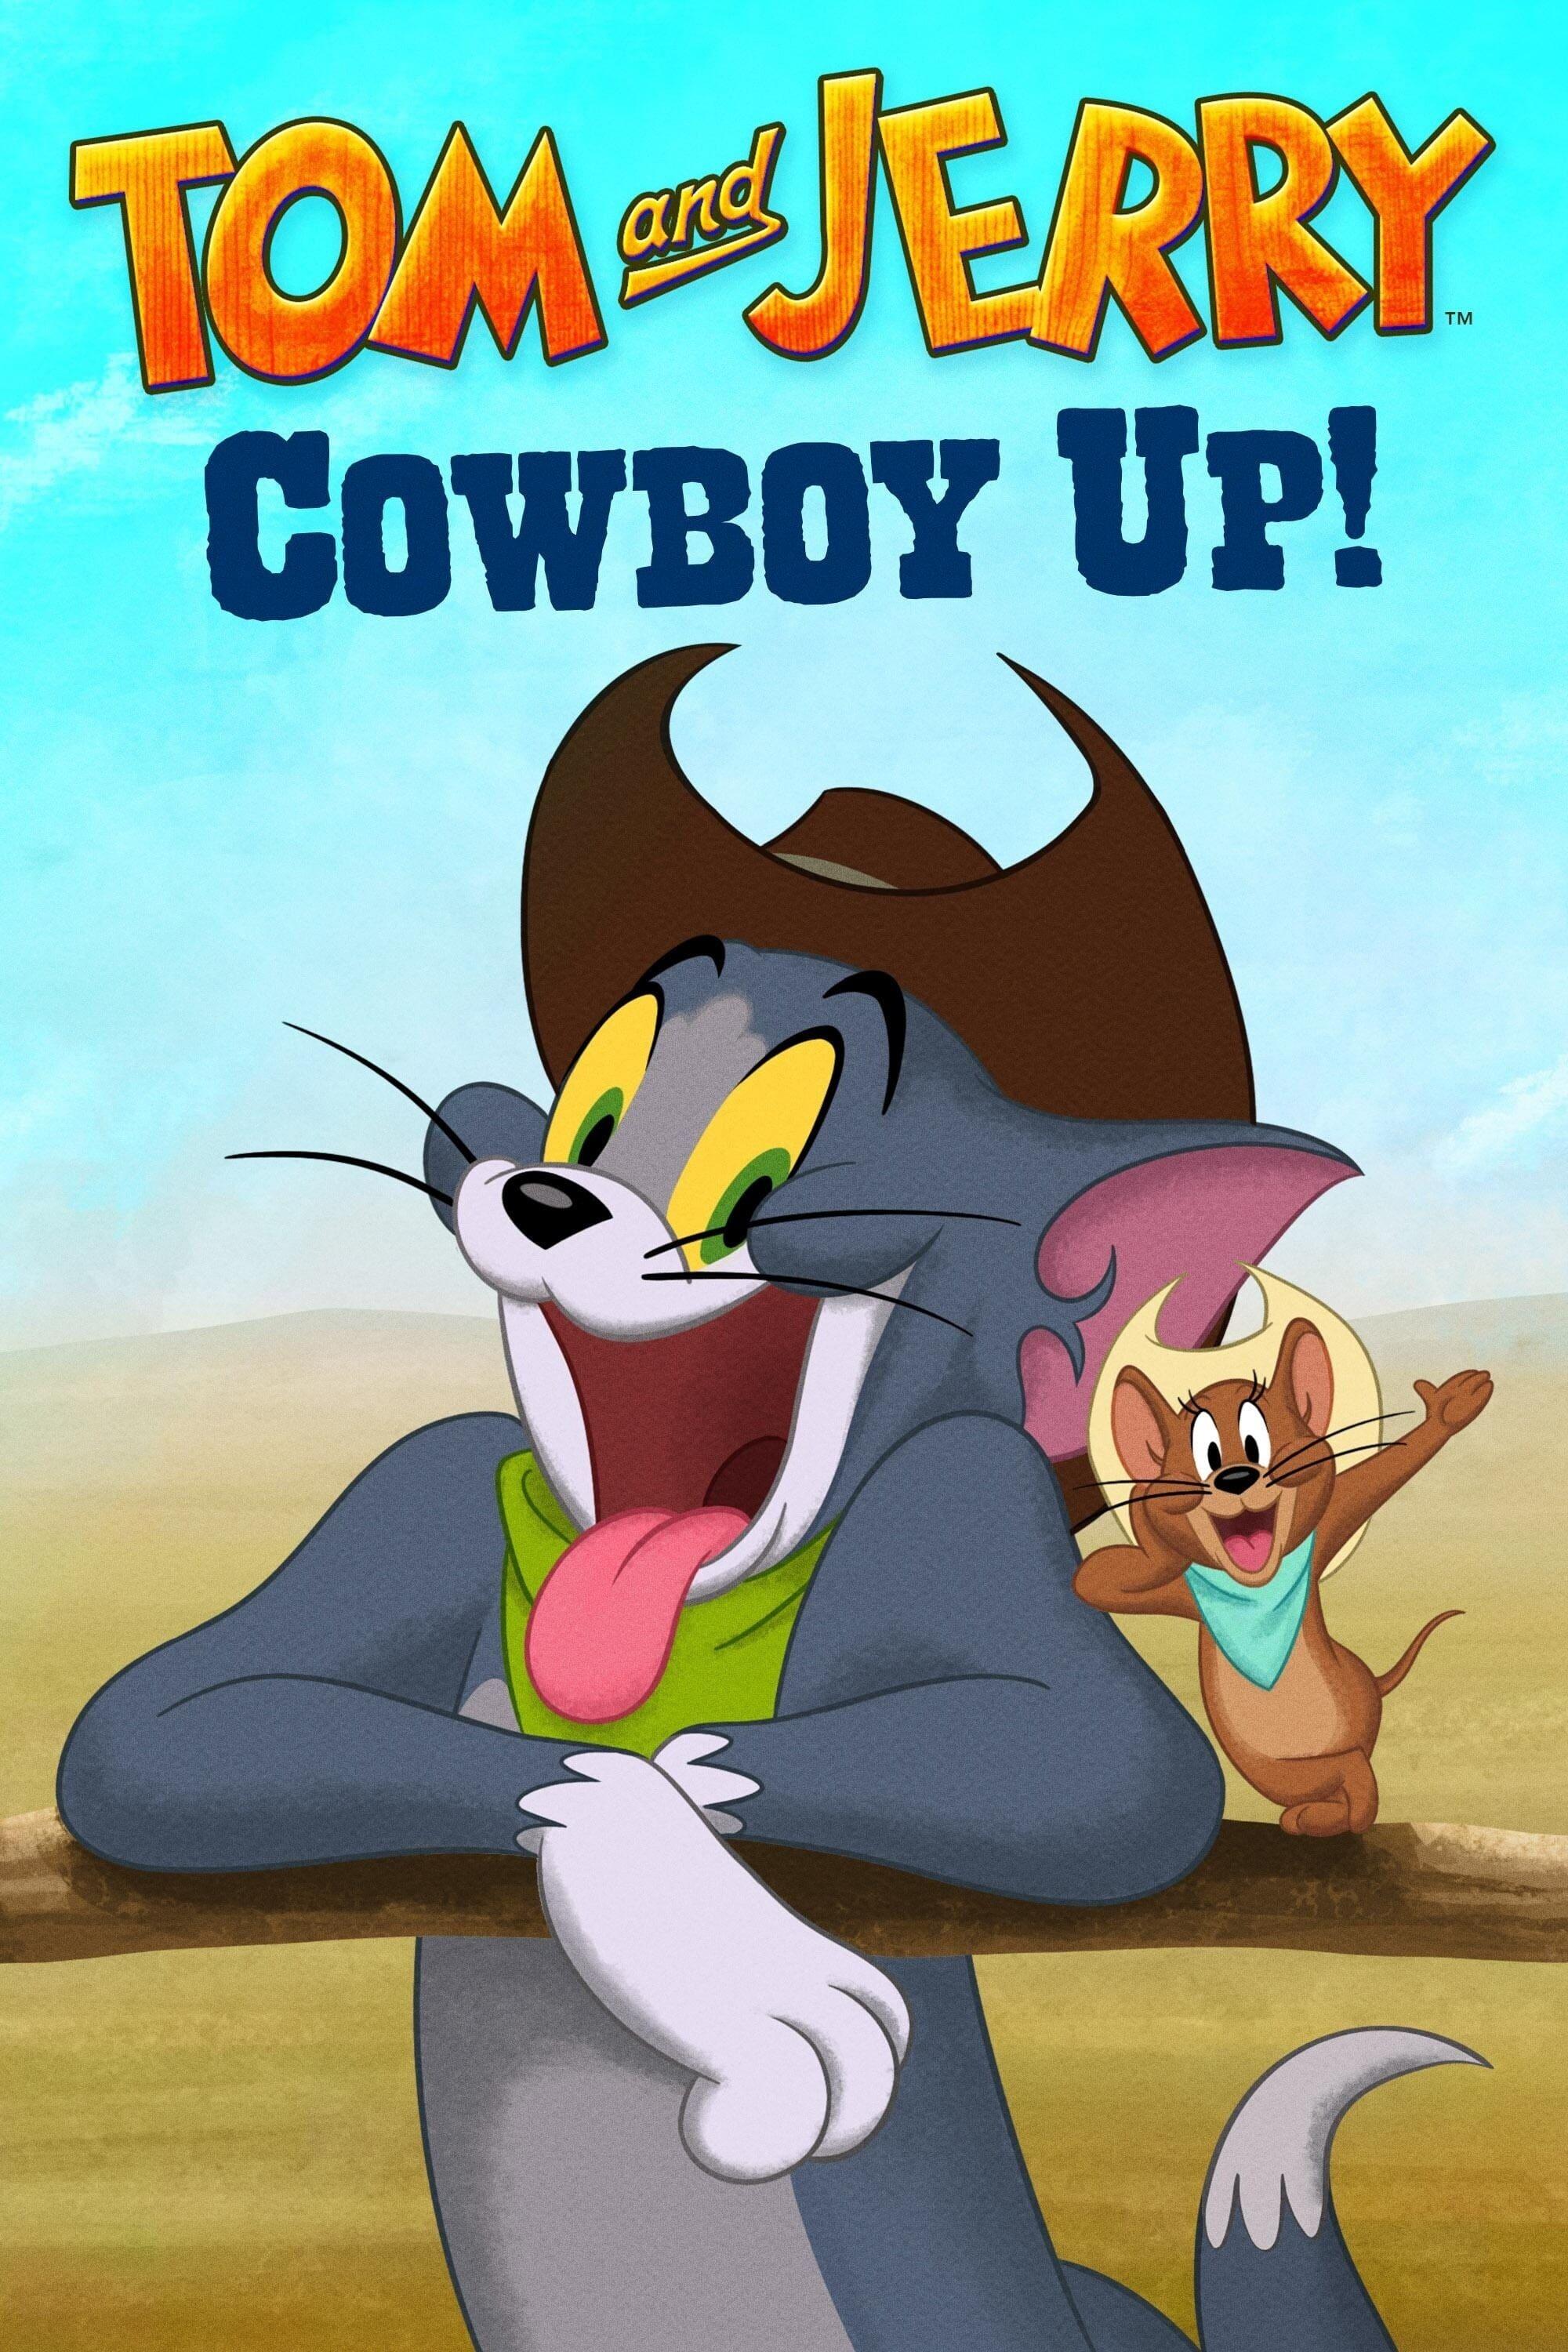 Tom and Jerry Cowboy Up! poster